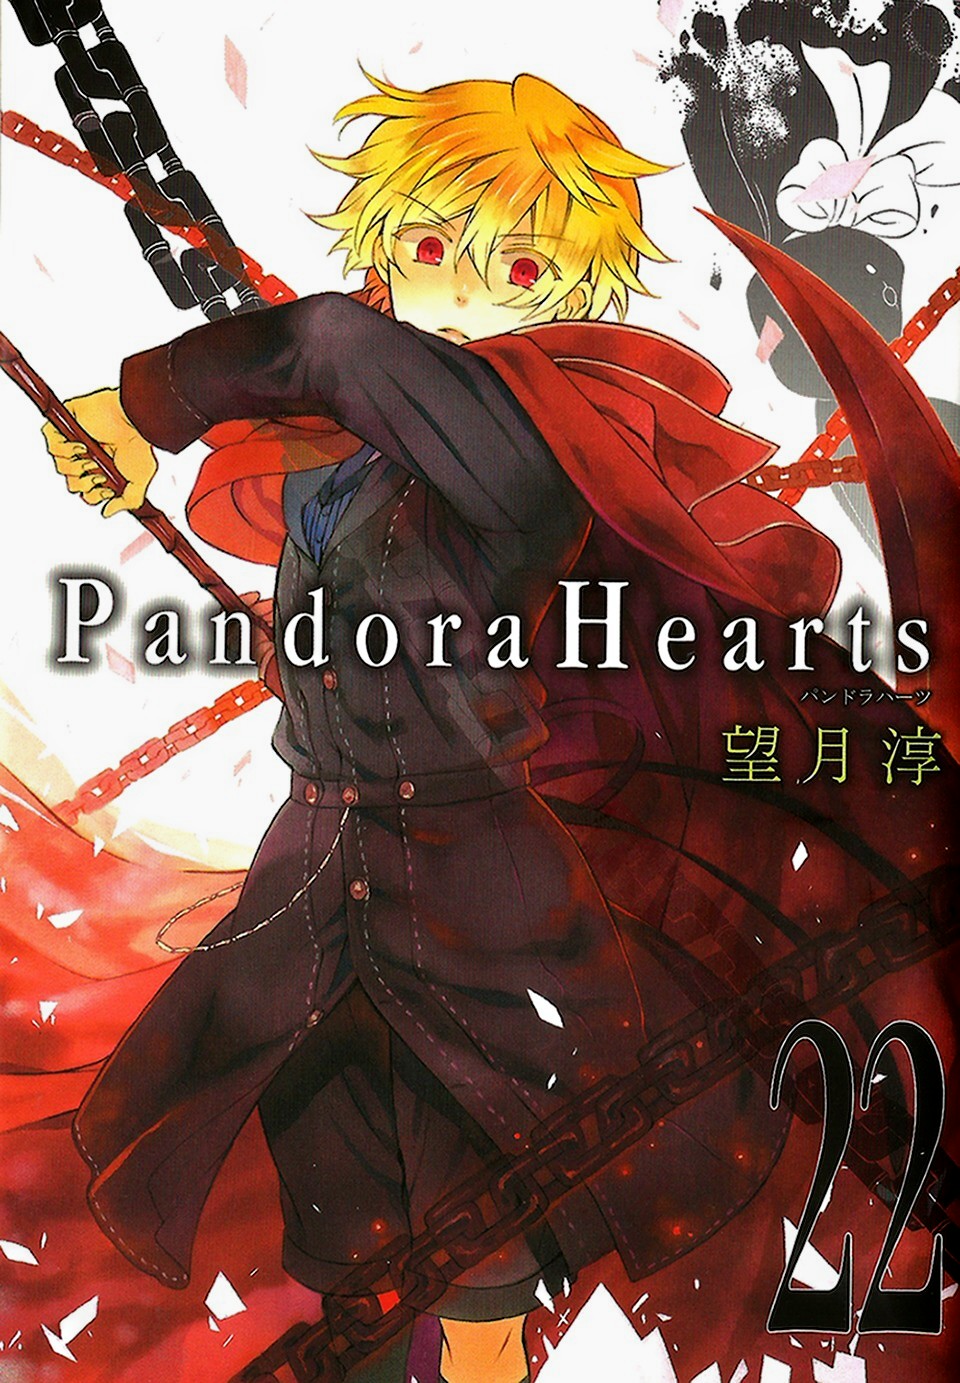 Info - Volume Covers Thread - Part 1, Page 95